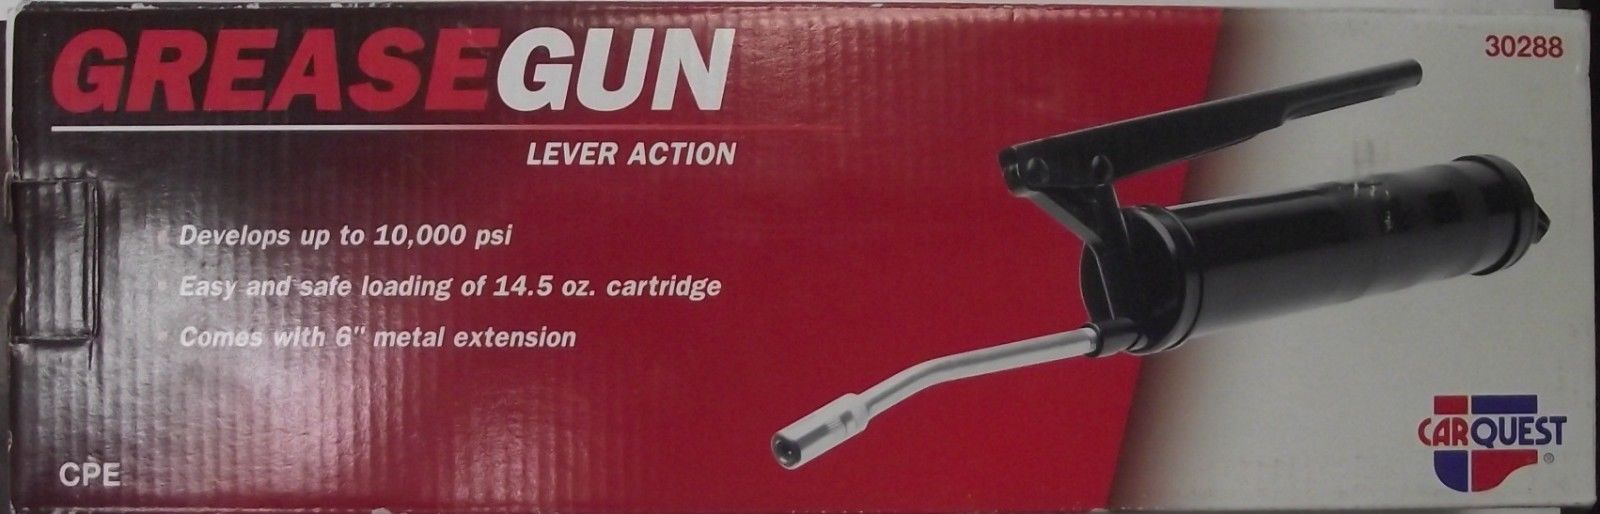 CarQuest 30288 Lever Action Grease Gun Up To 10,000 PSI